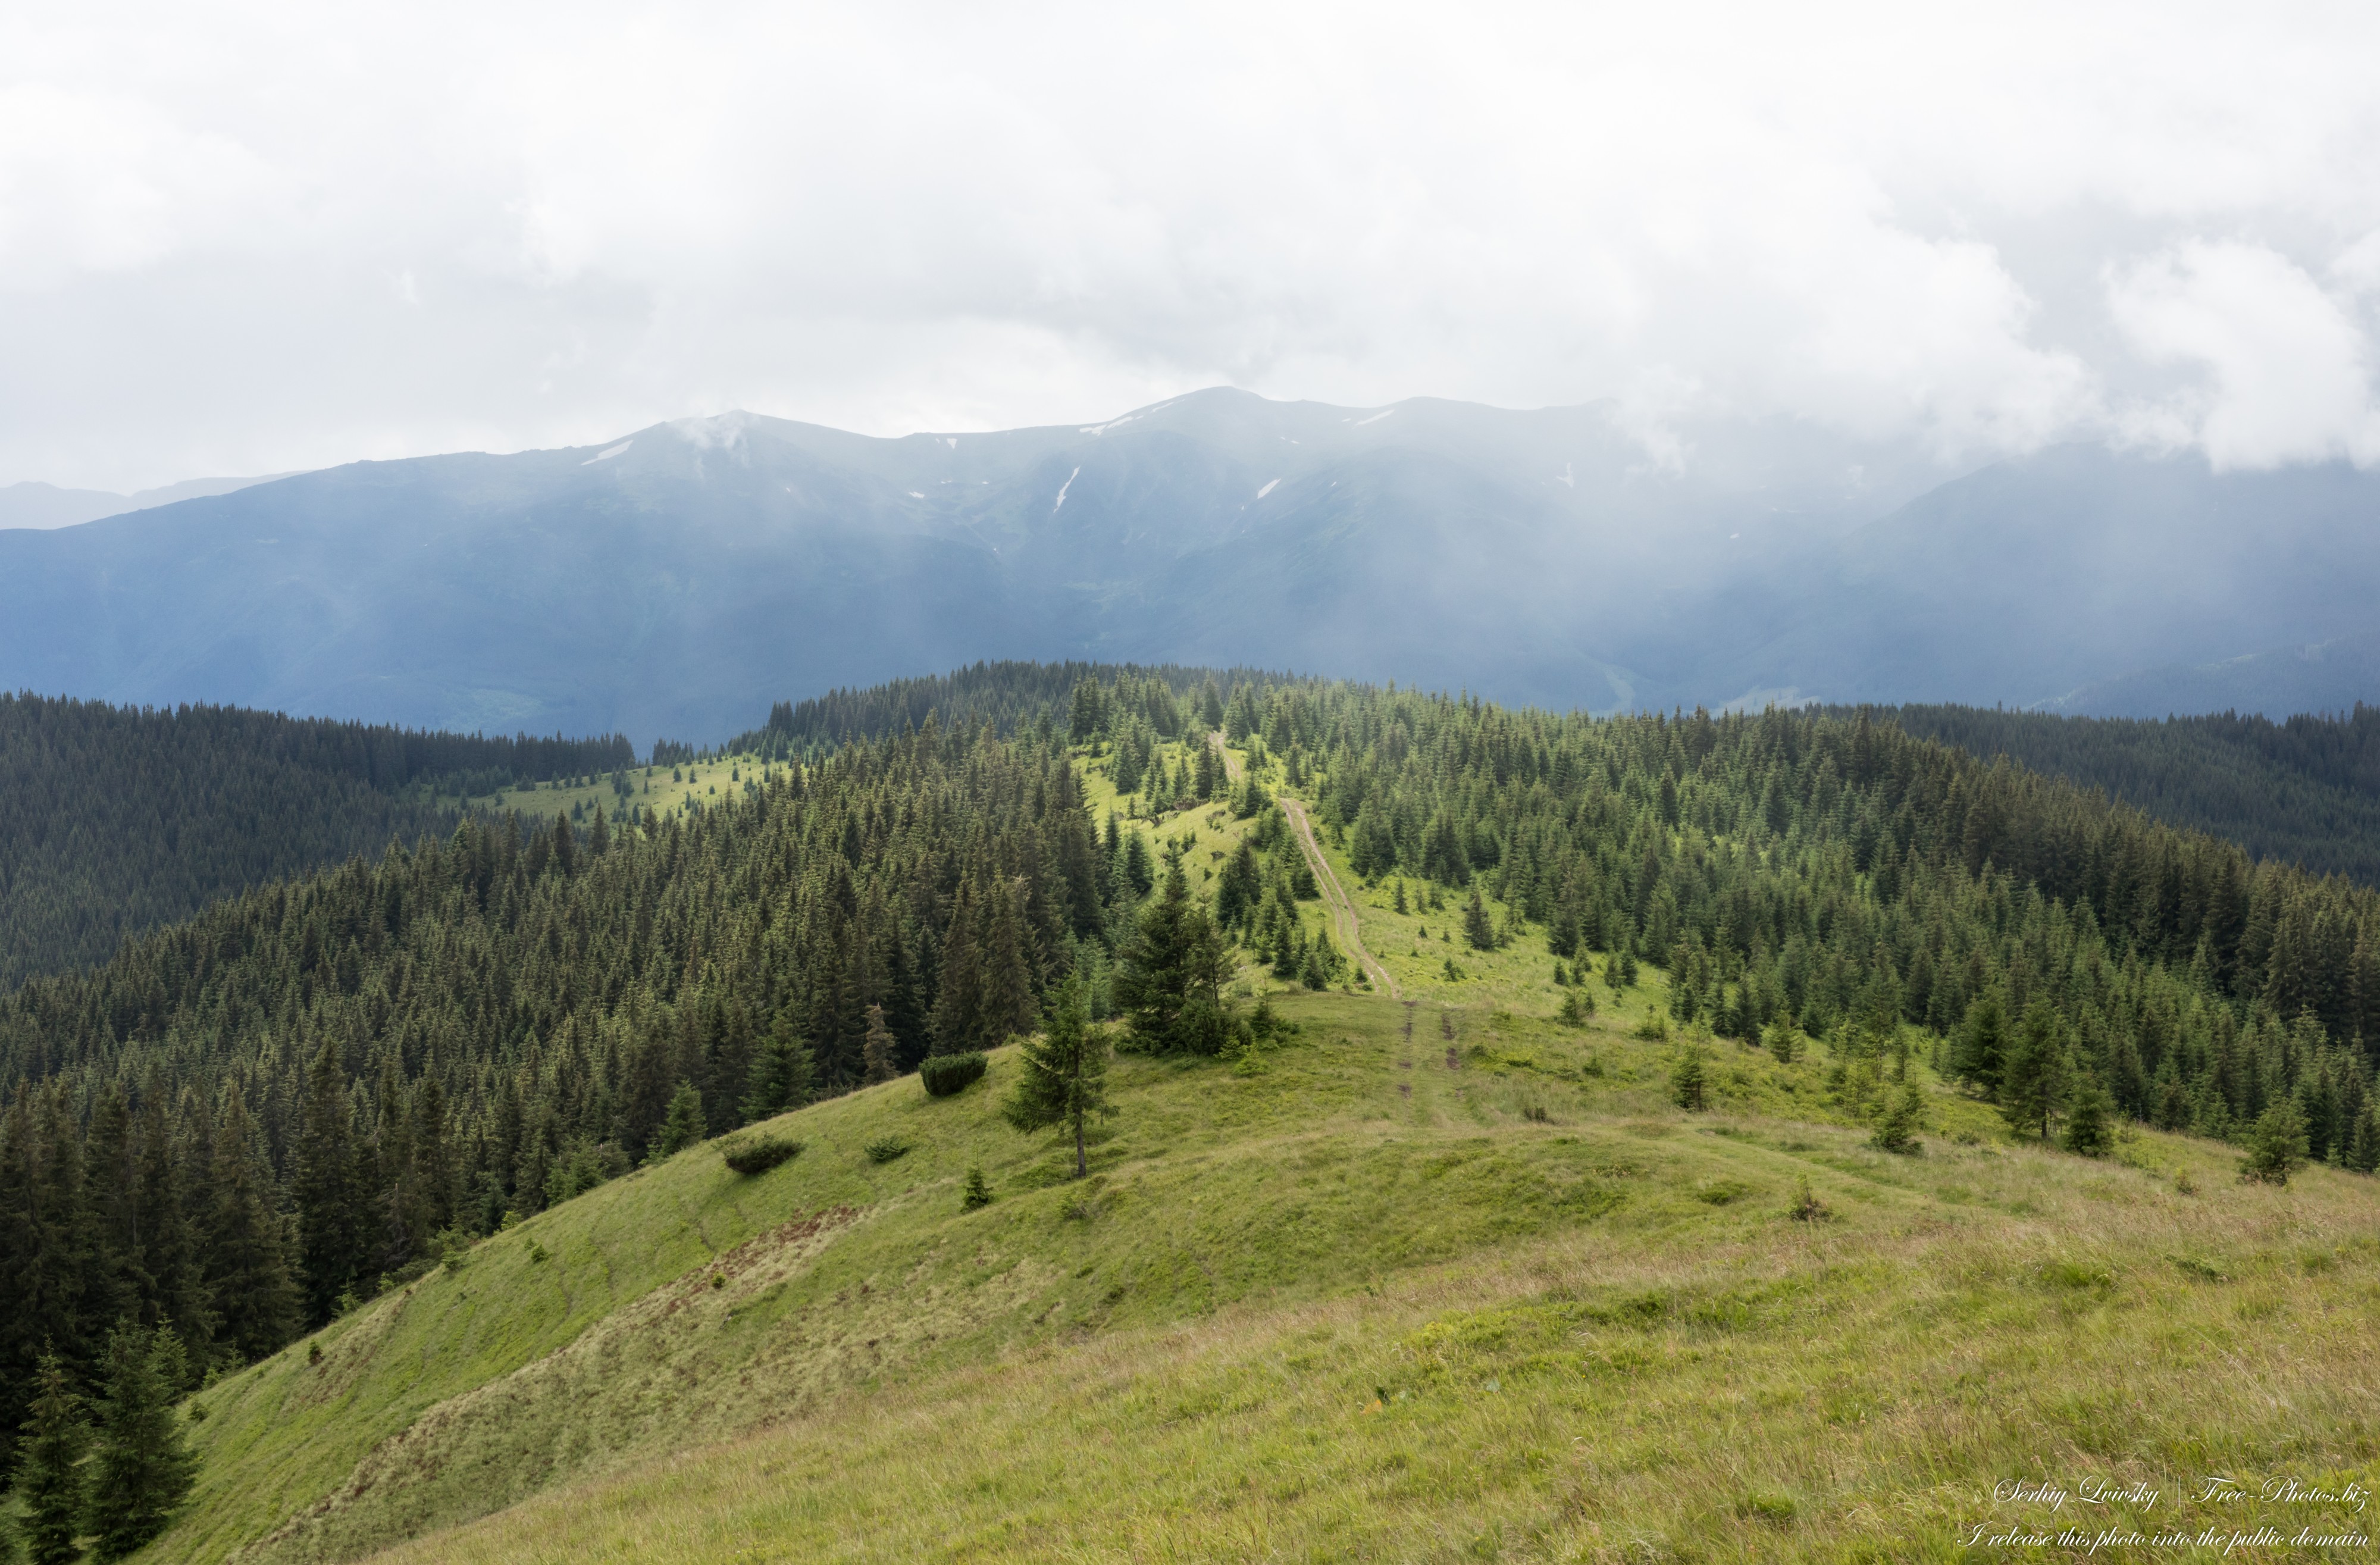 Carpathian mountains in Ukraine photographed in July 2022 by Serhiy Lvivsky, picture 20